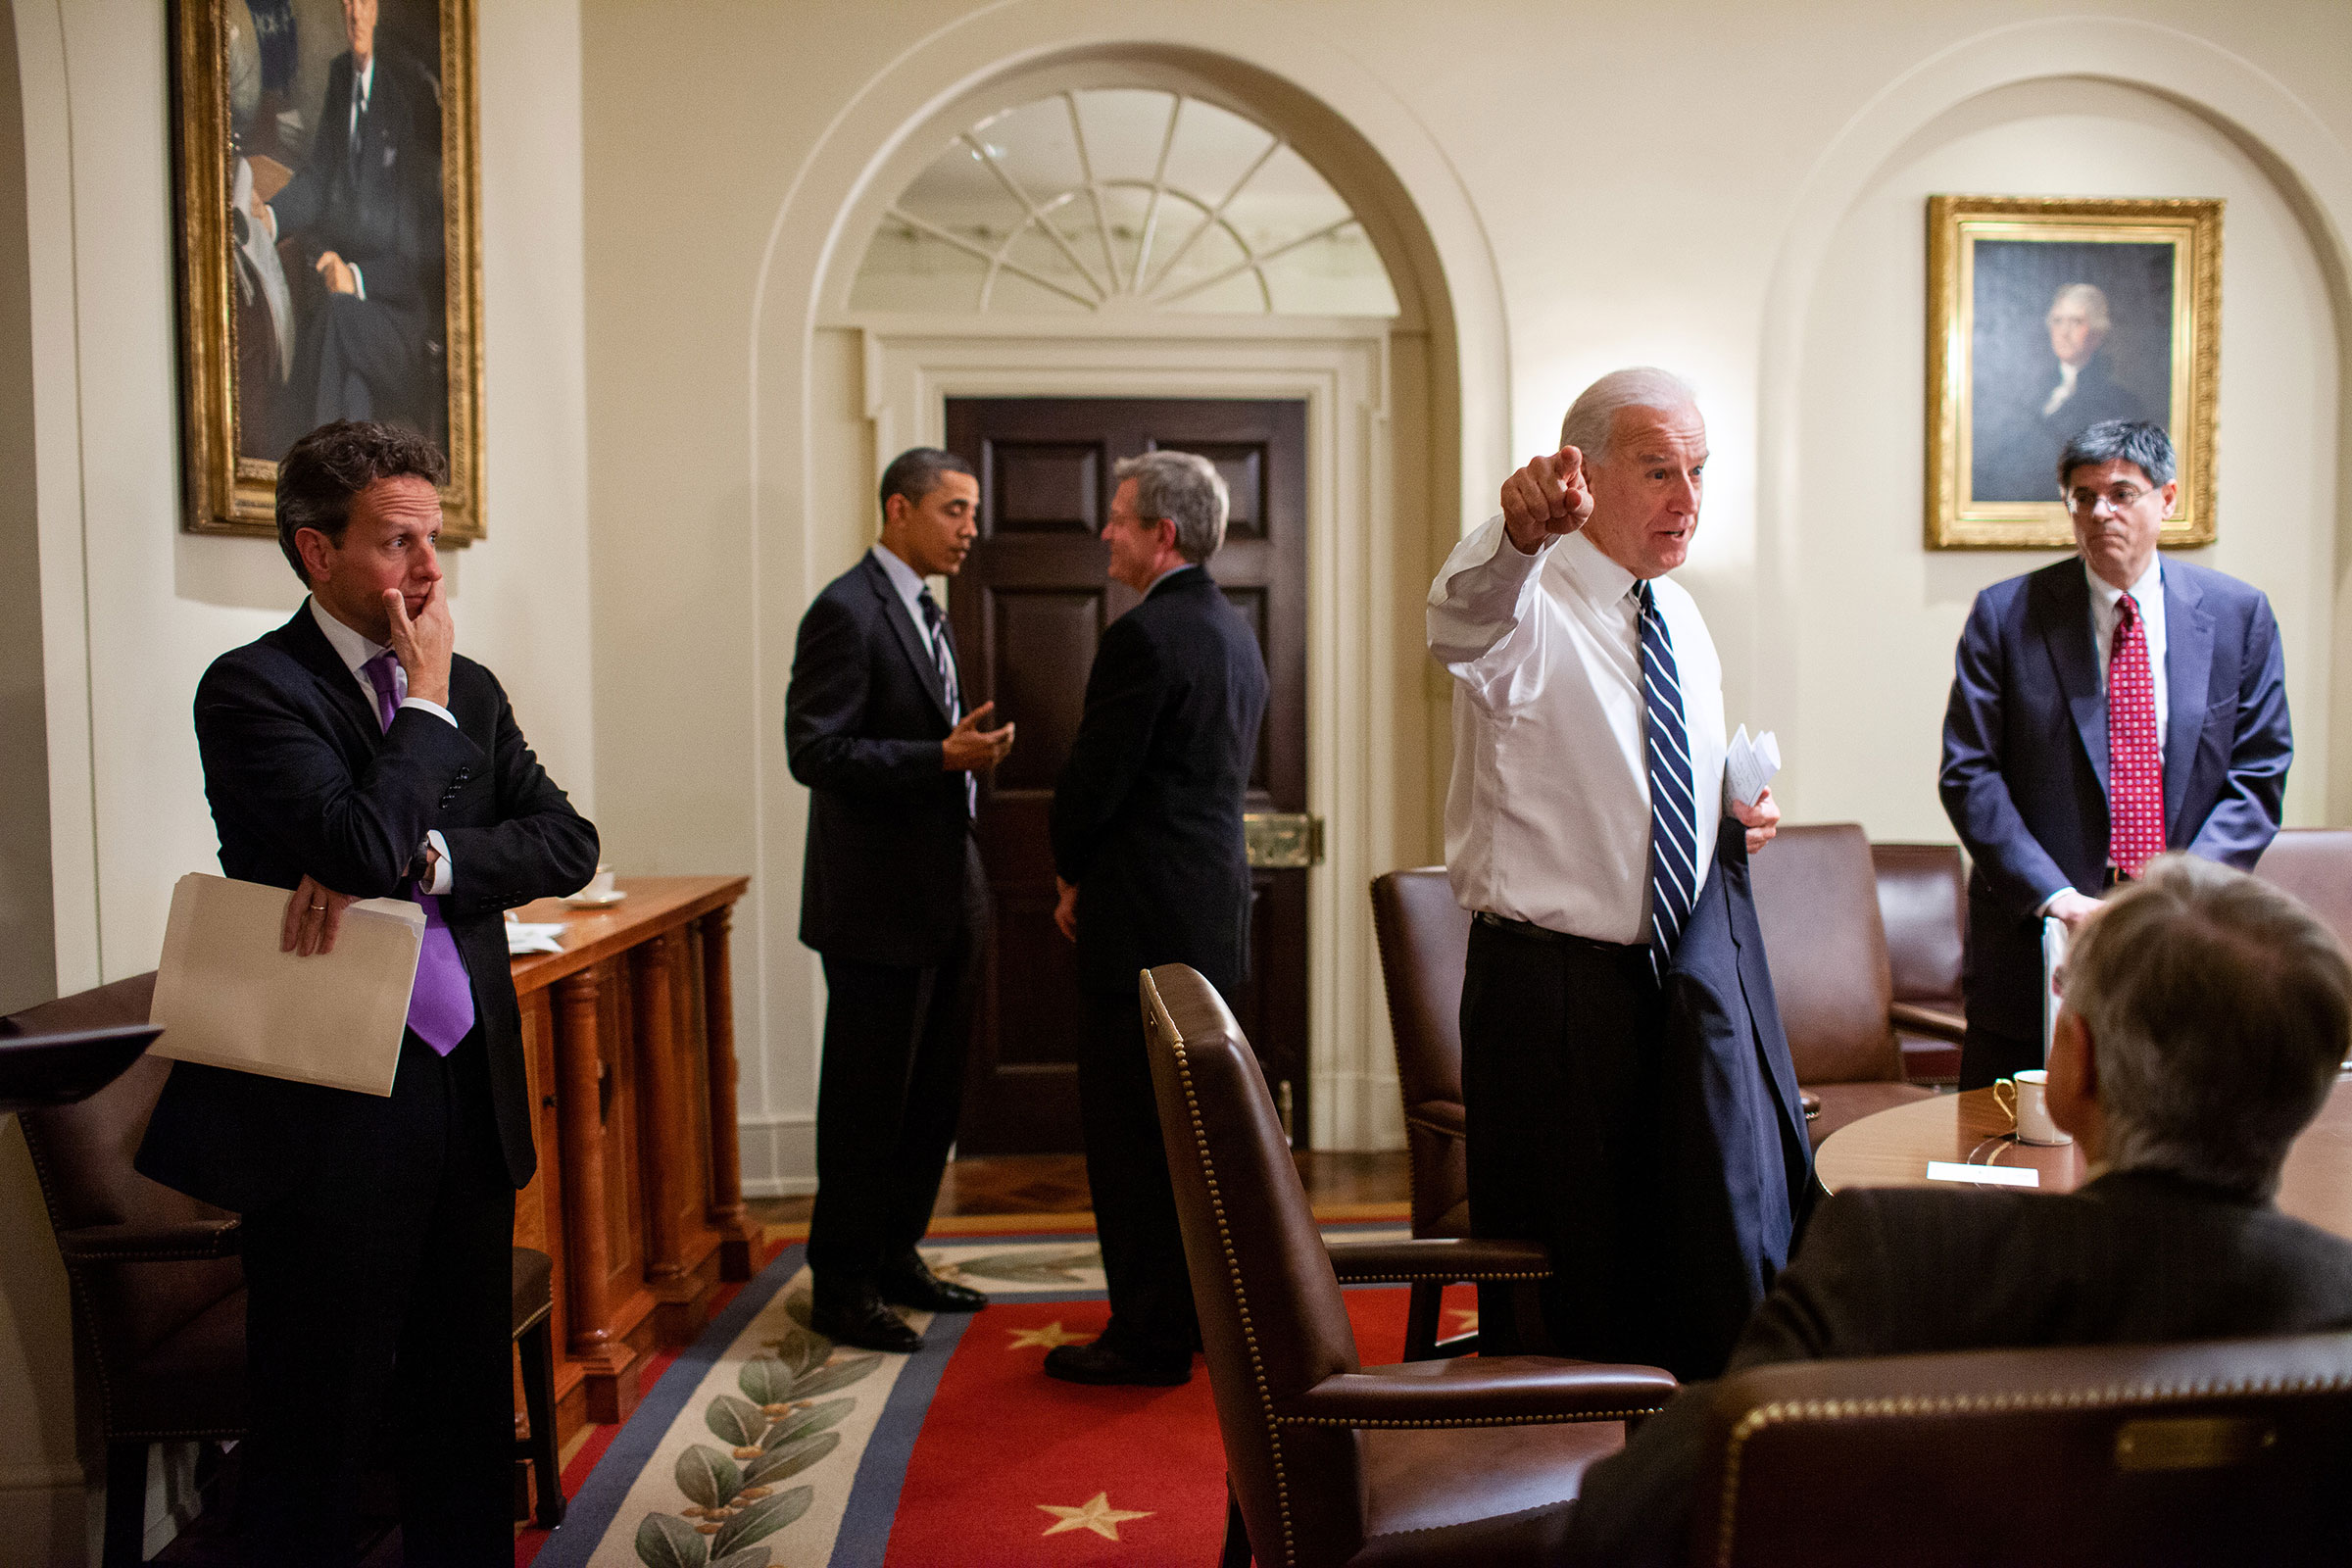 President Barack Obama, Vice President Joe Biden, and Treasury Secretary Timothy F. Geithner meet with Senate Democratic leaders in the Cabinet Room of the White House, on Dec. 6, 2010. (Official White House Photo by Pete Souza)